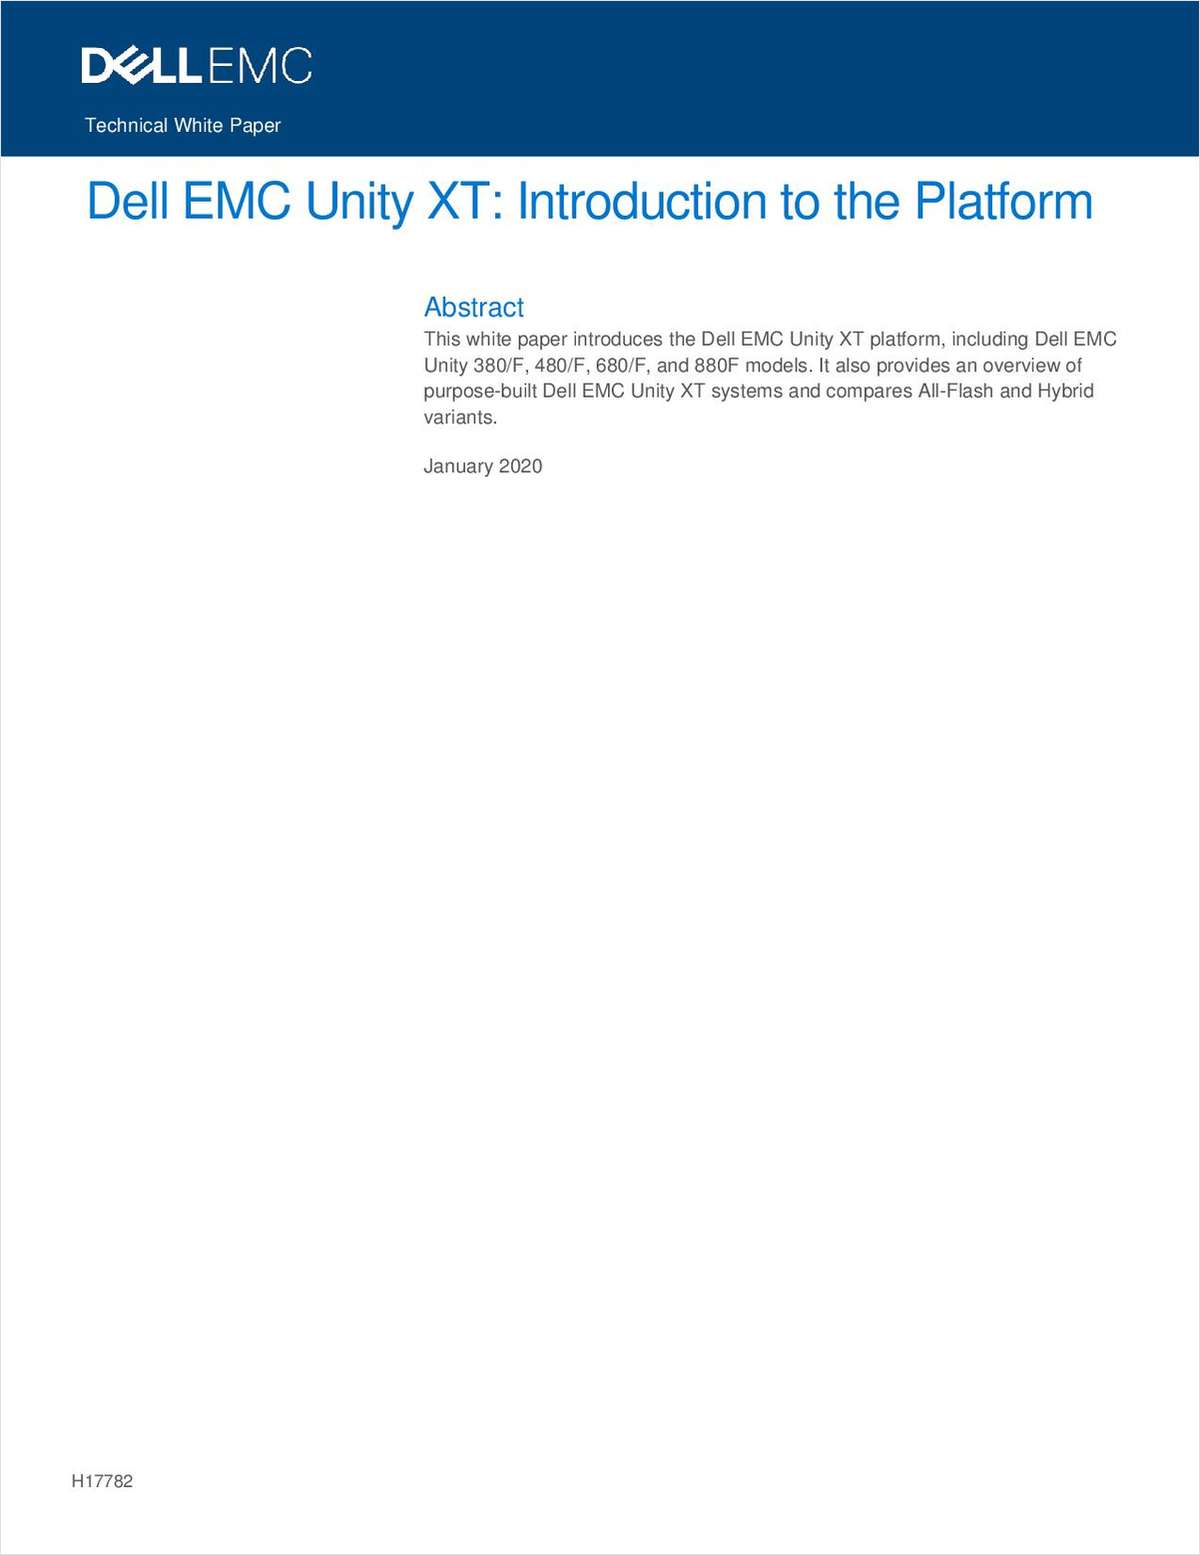 Unleash the power of unified storage speed and efficiency with Dell EMC Unity XT